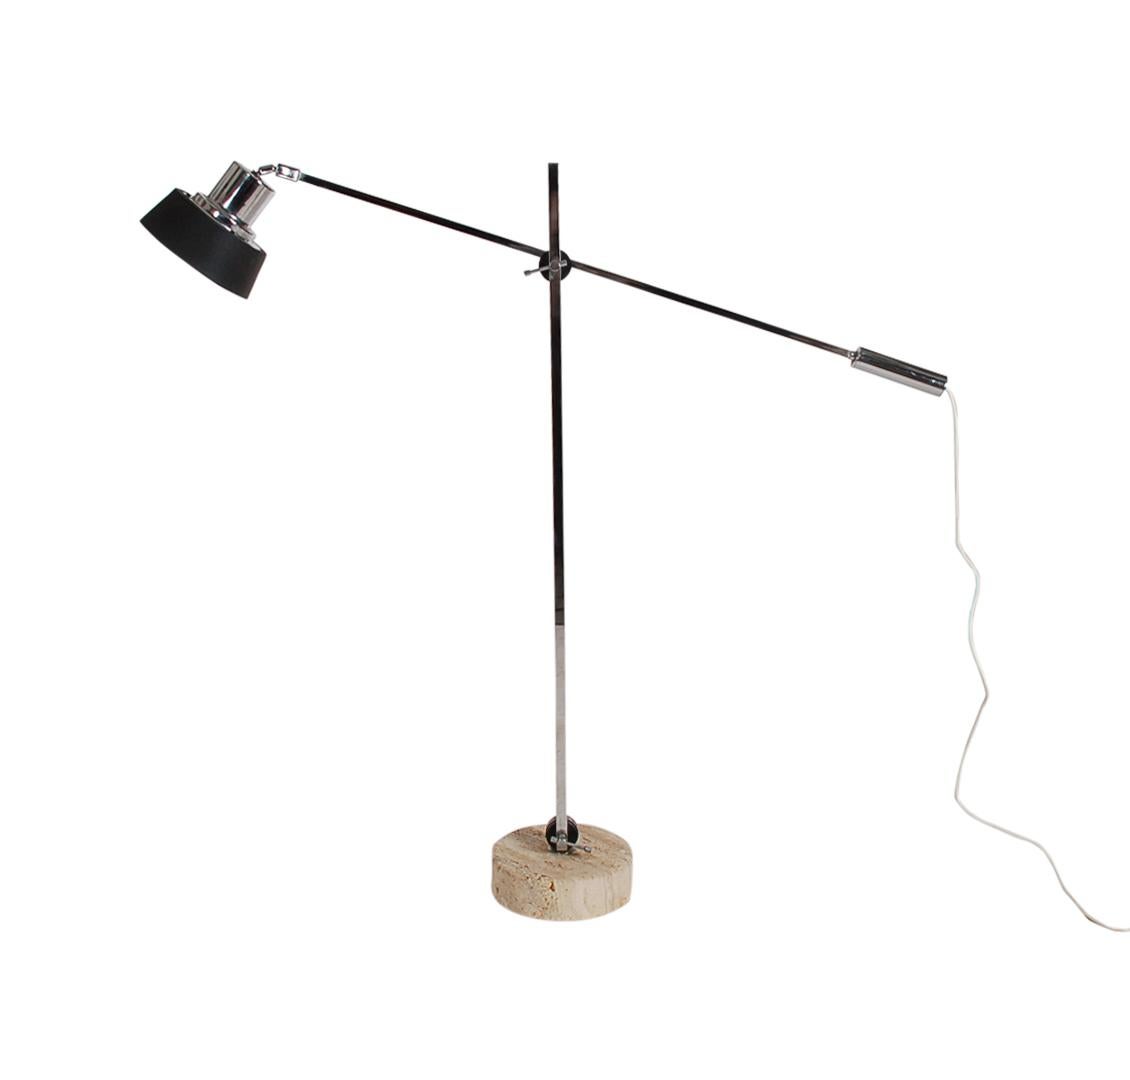 Adjustable Midcentury Postmodern Italian Floor Lamp in Chrome and Travertine In Good Condition For Sale In Philadelphia, PA